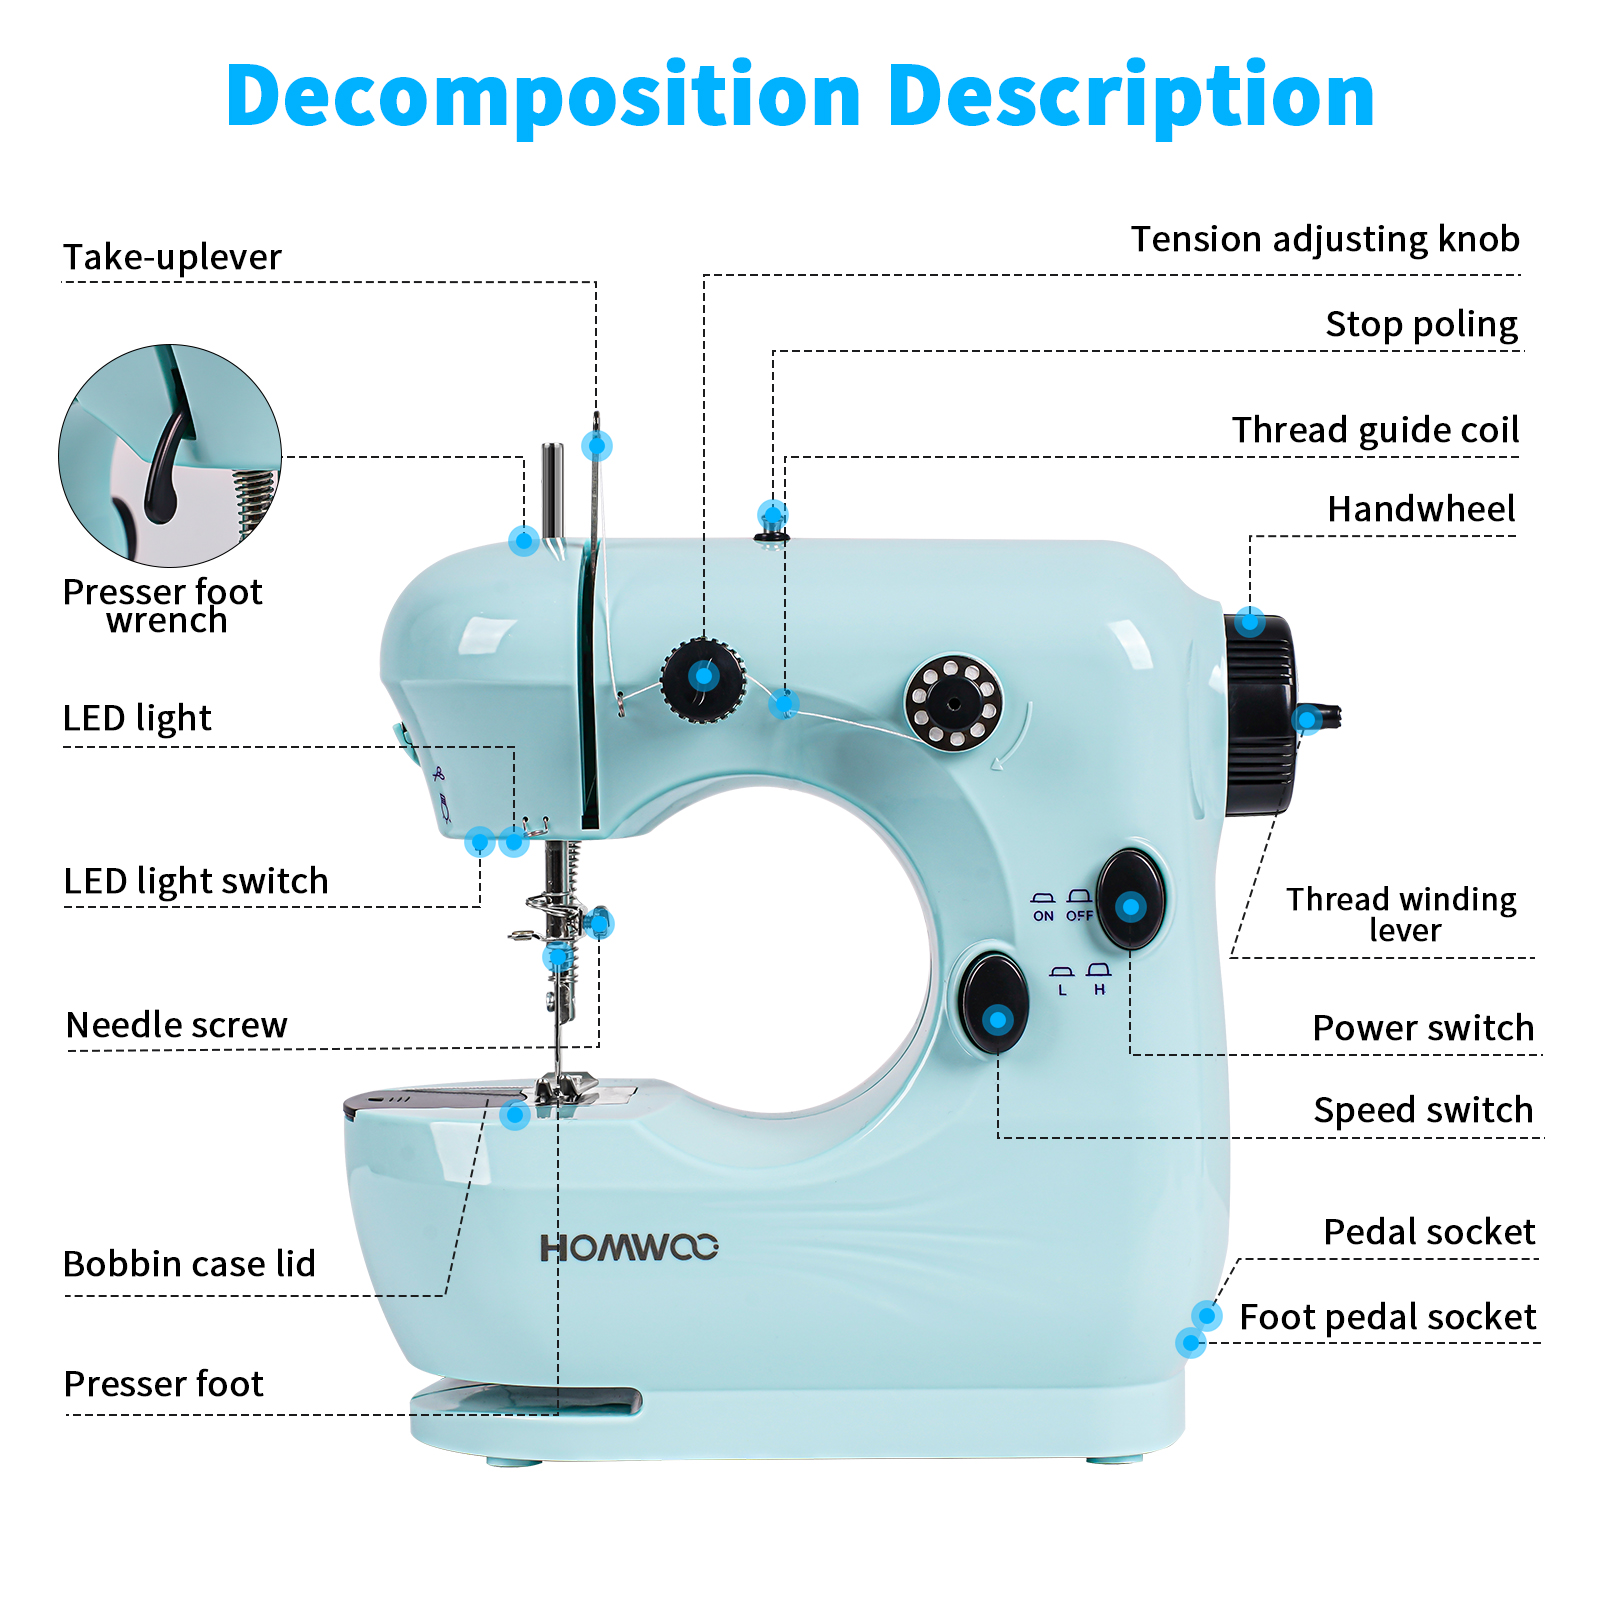 HOMWOO Mini Sewing Machine for Beginner, Dual Speed Portable Sewing Machine with Extension Table, Stitch, Sewing Kit for Household, Mother's Day Gifts - image 5 of 7